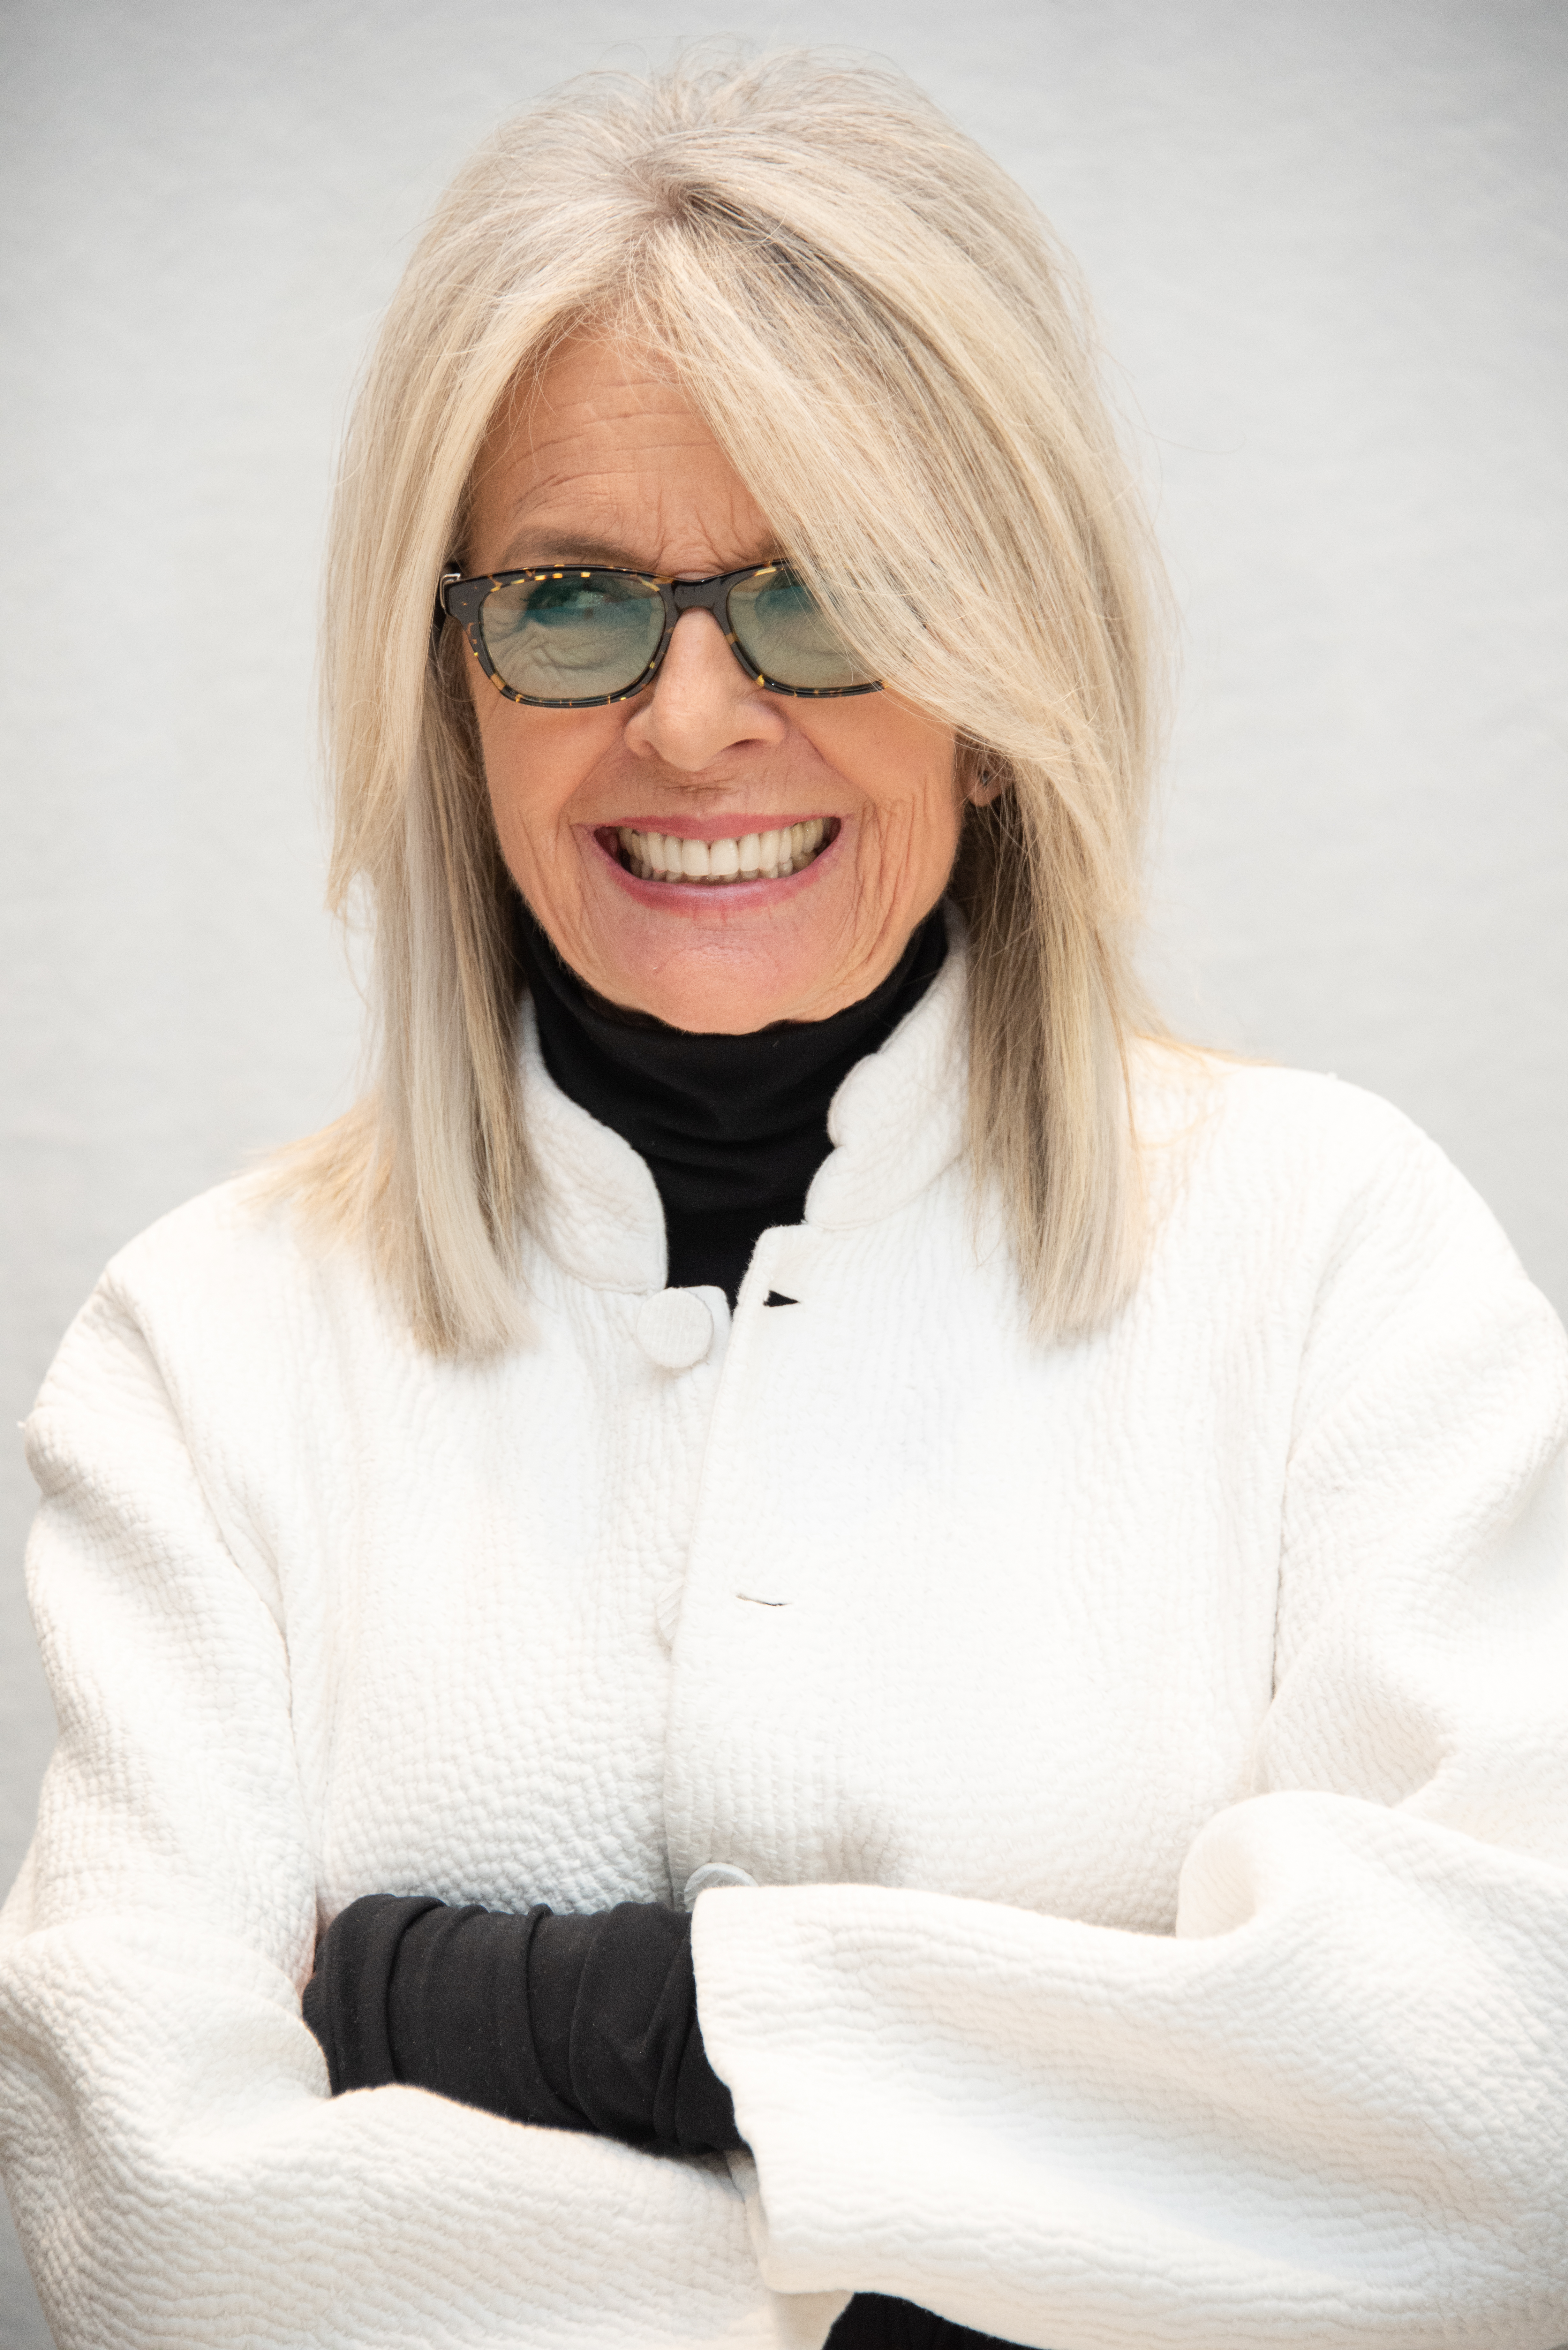 Diane Keaton at the press conference for "Poms" in Beverly Hills, 2019 | Source: Getty Images